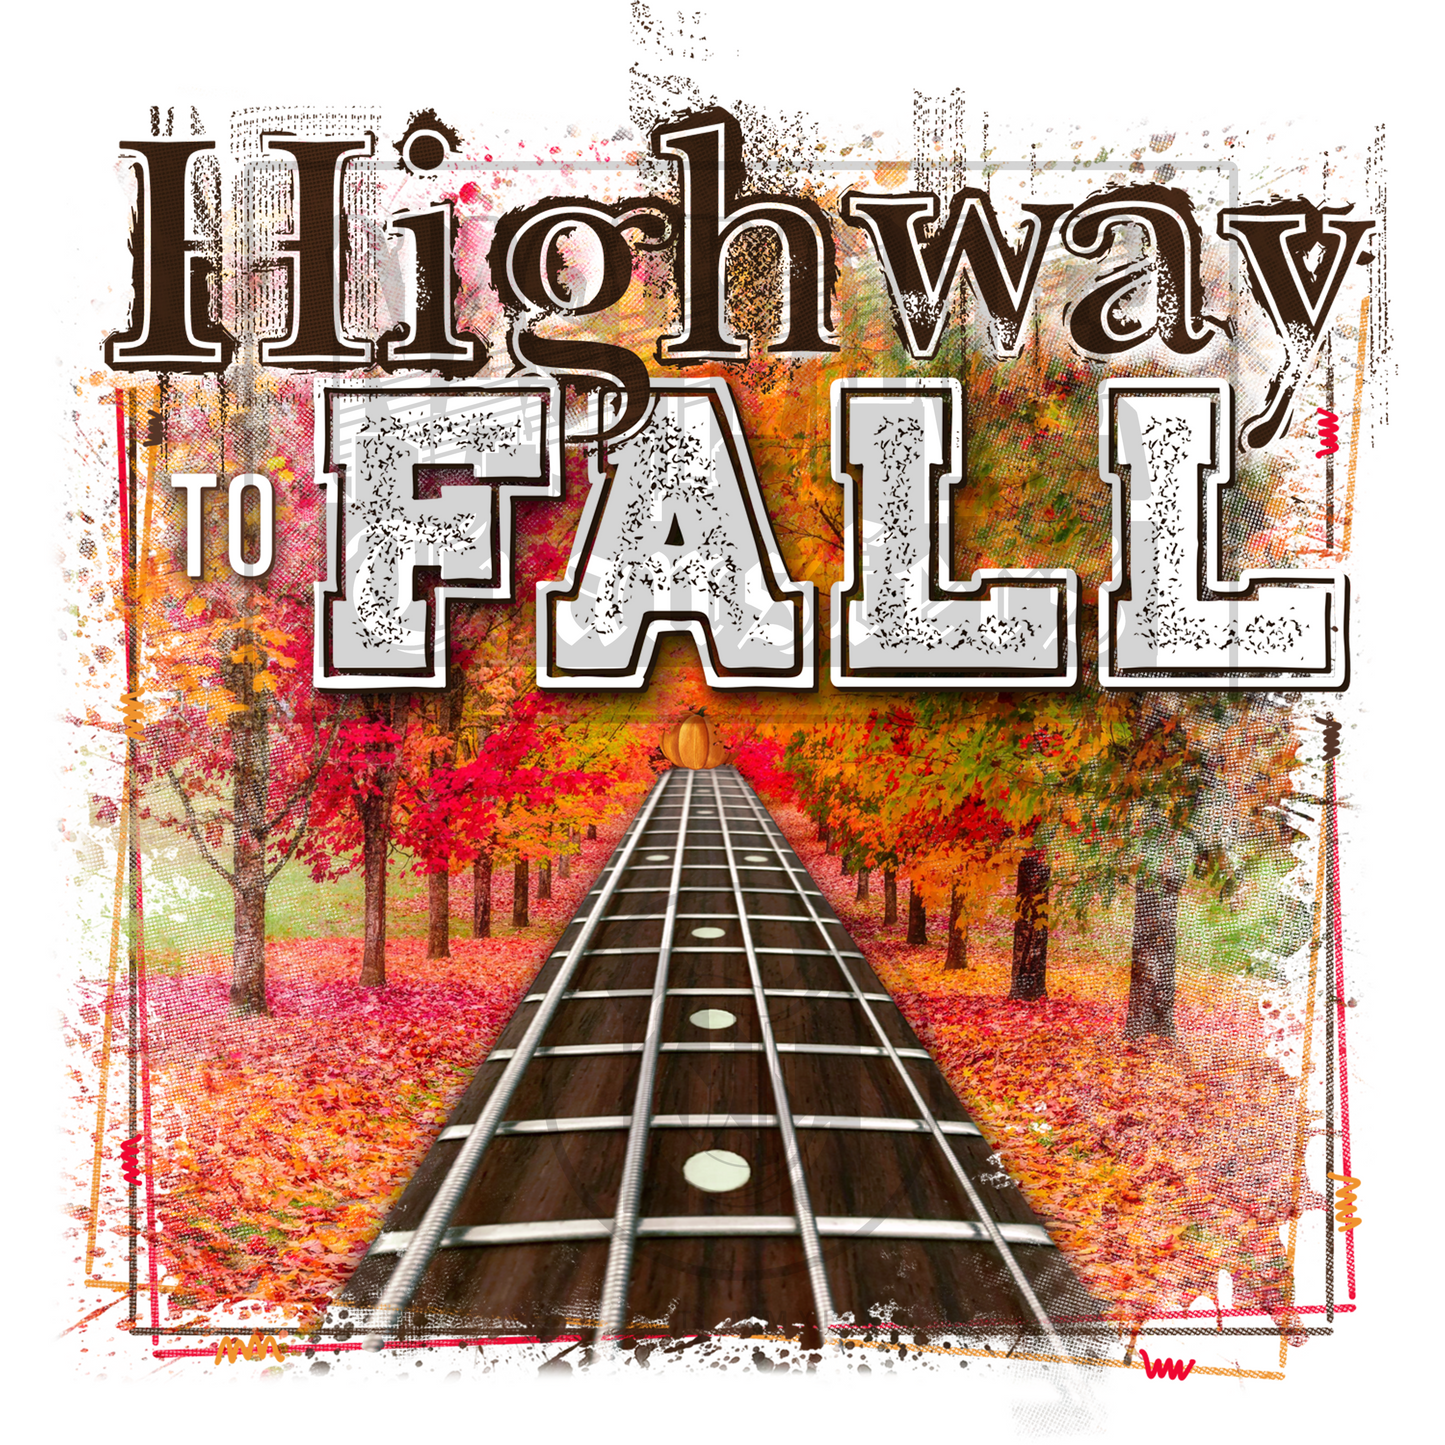 Highway to fall stock transfer.